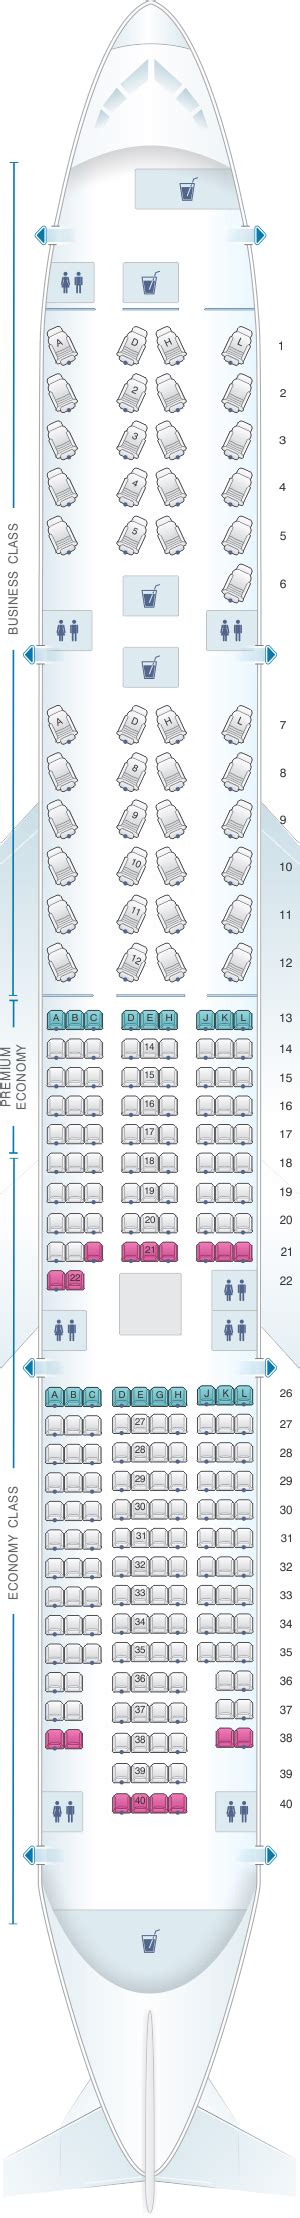 American Airlines Boeing 777 Jet Seat Map